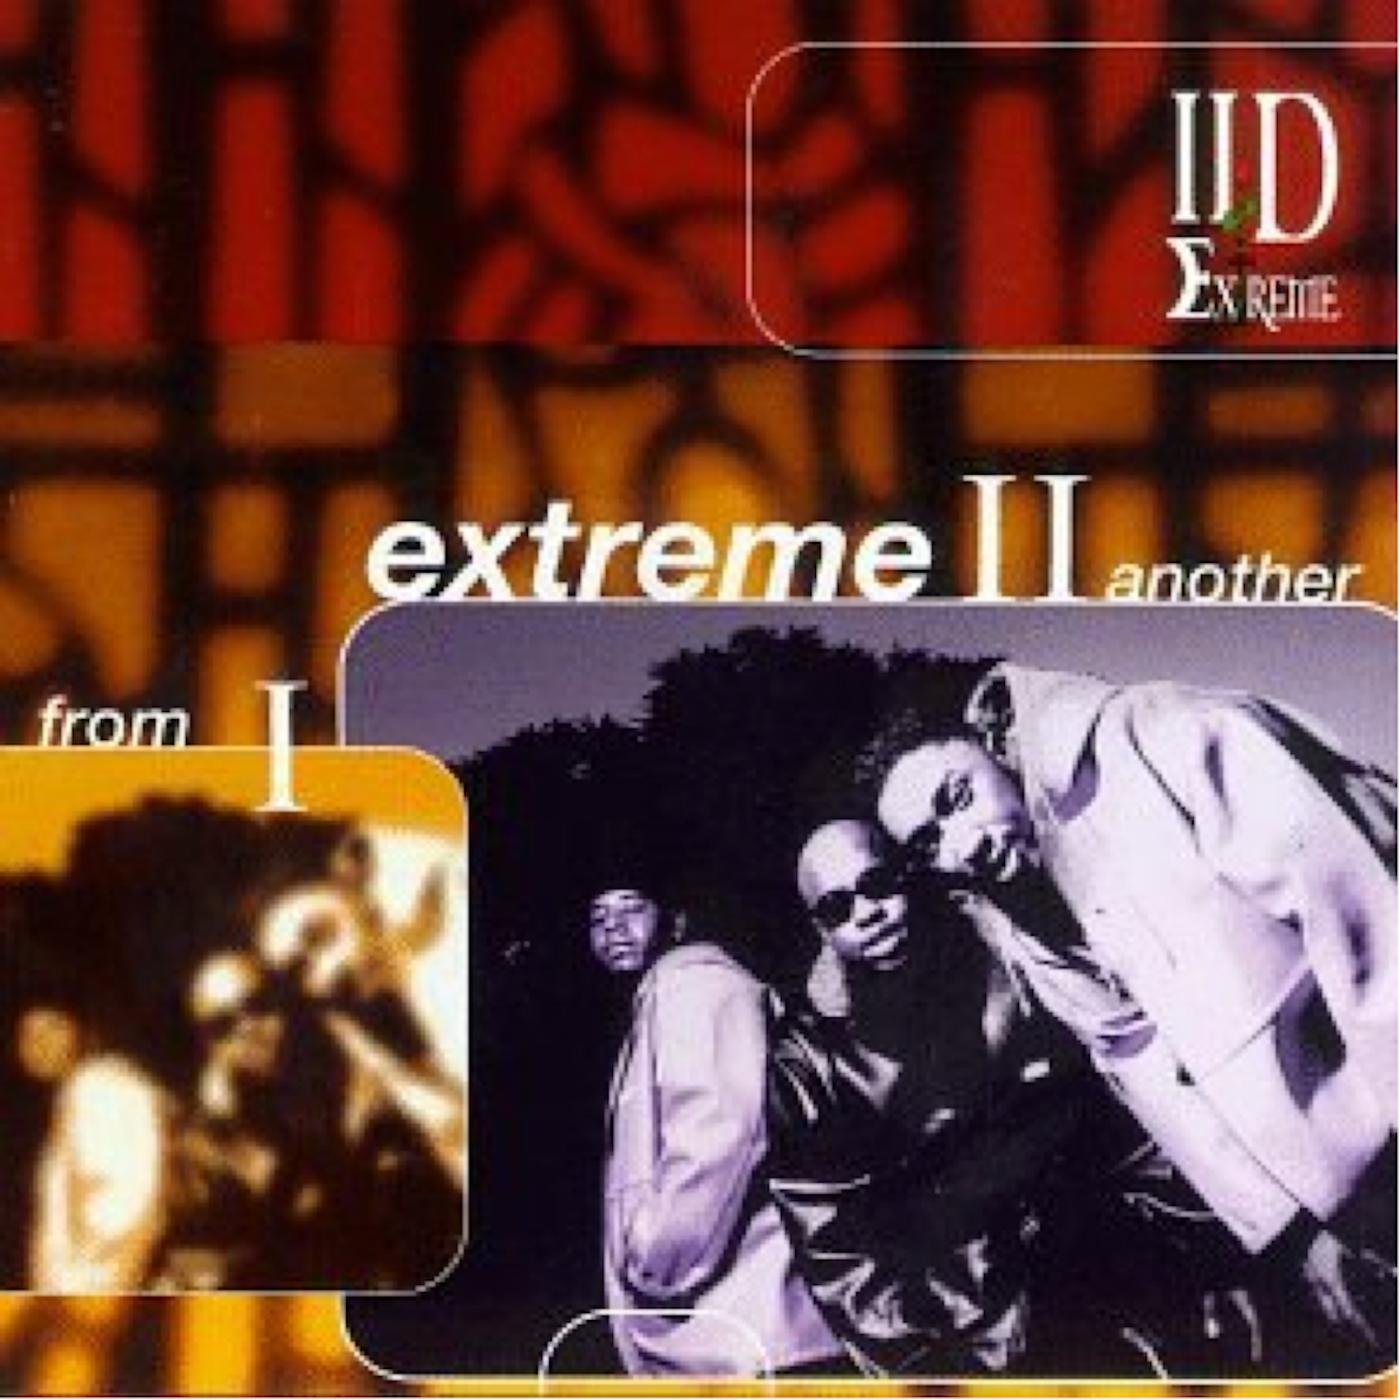 II D Extreme – From I Extreme II Another (1996) [FLAC]